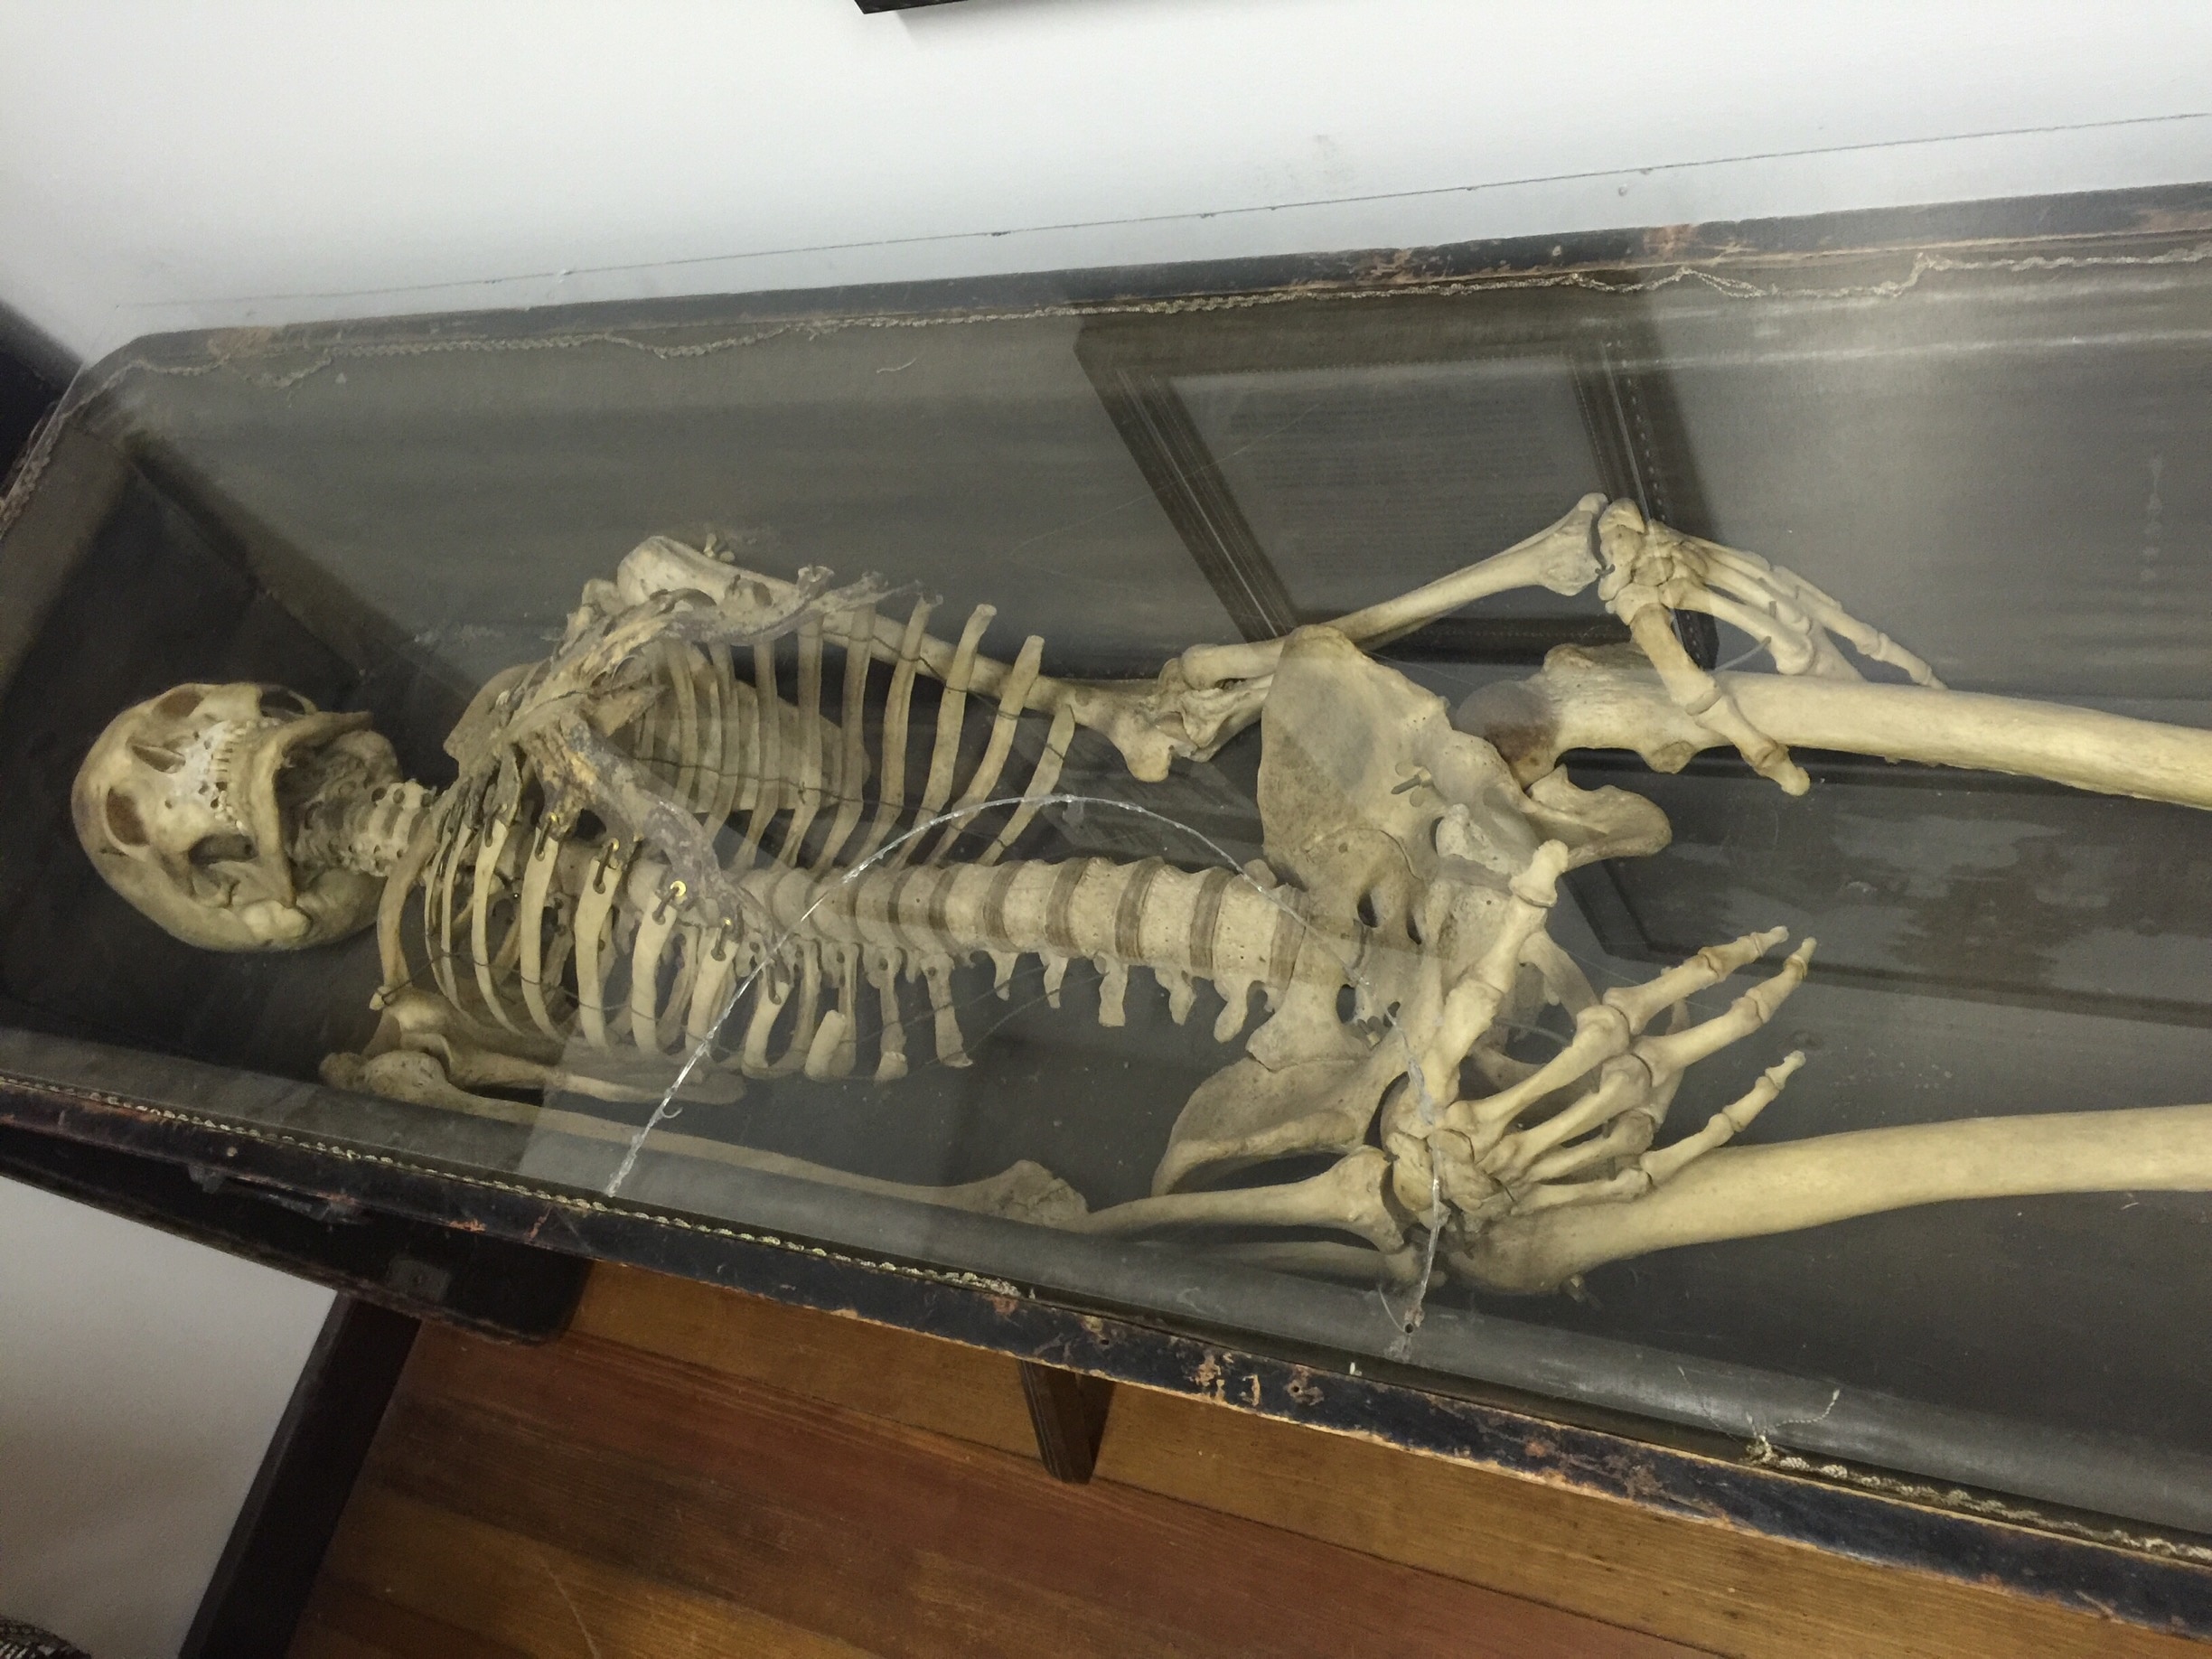 This is George, he was a member of the Odd Fellow fraternal society in the late 1800's and donated his skeleton to be used for rituals which is now on display at the winery. I've heard he prefers Merlot.